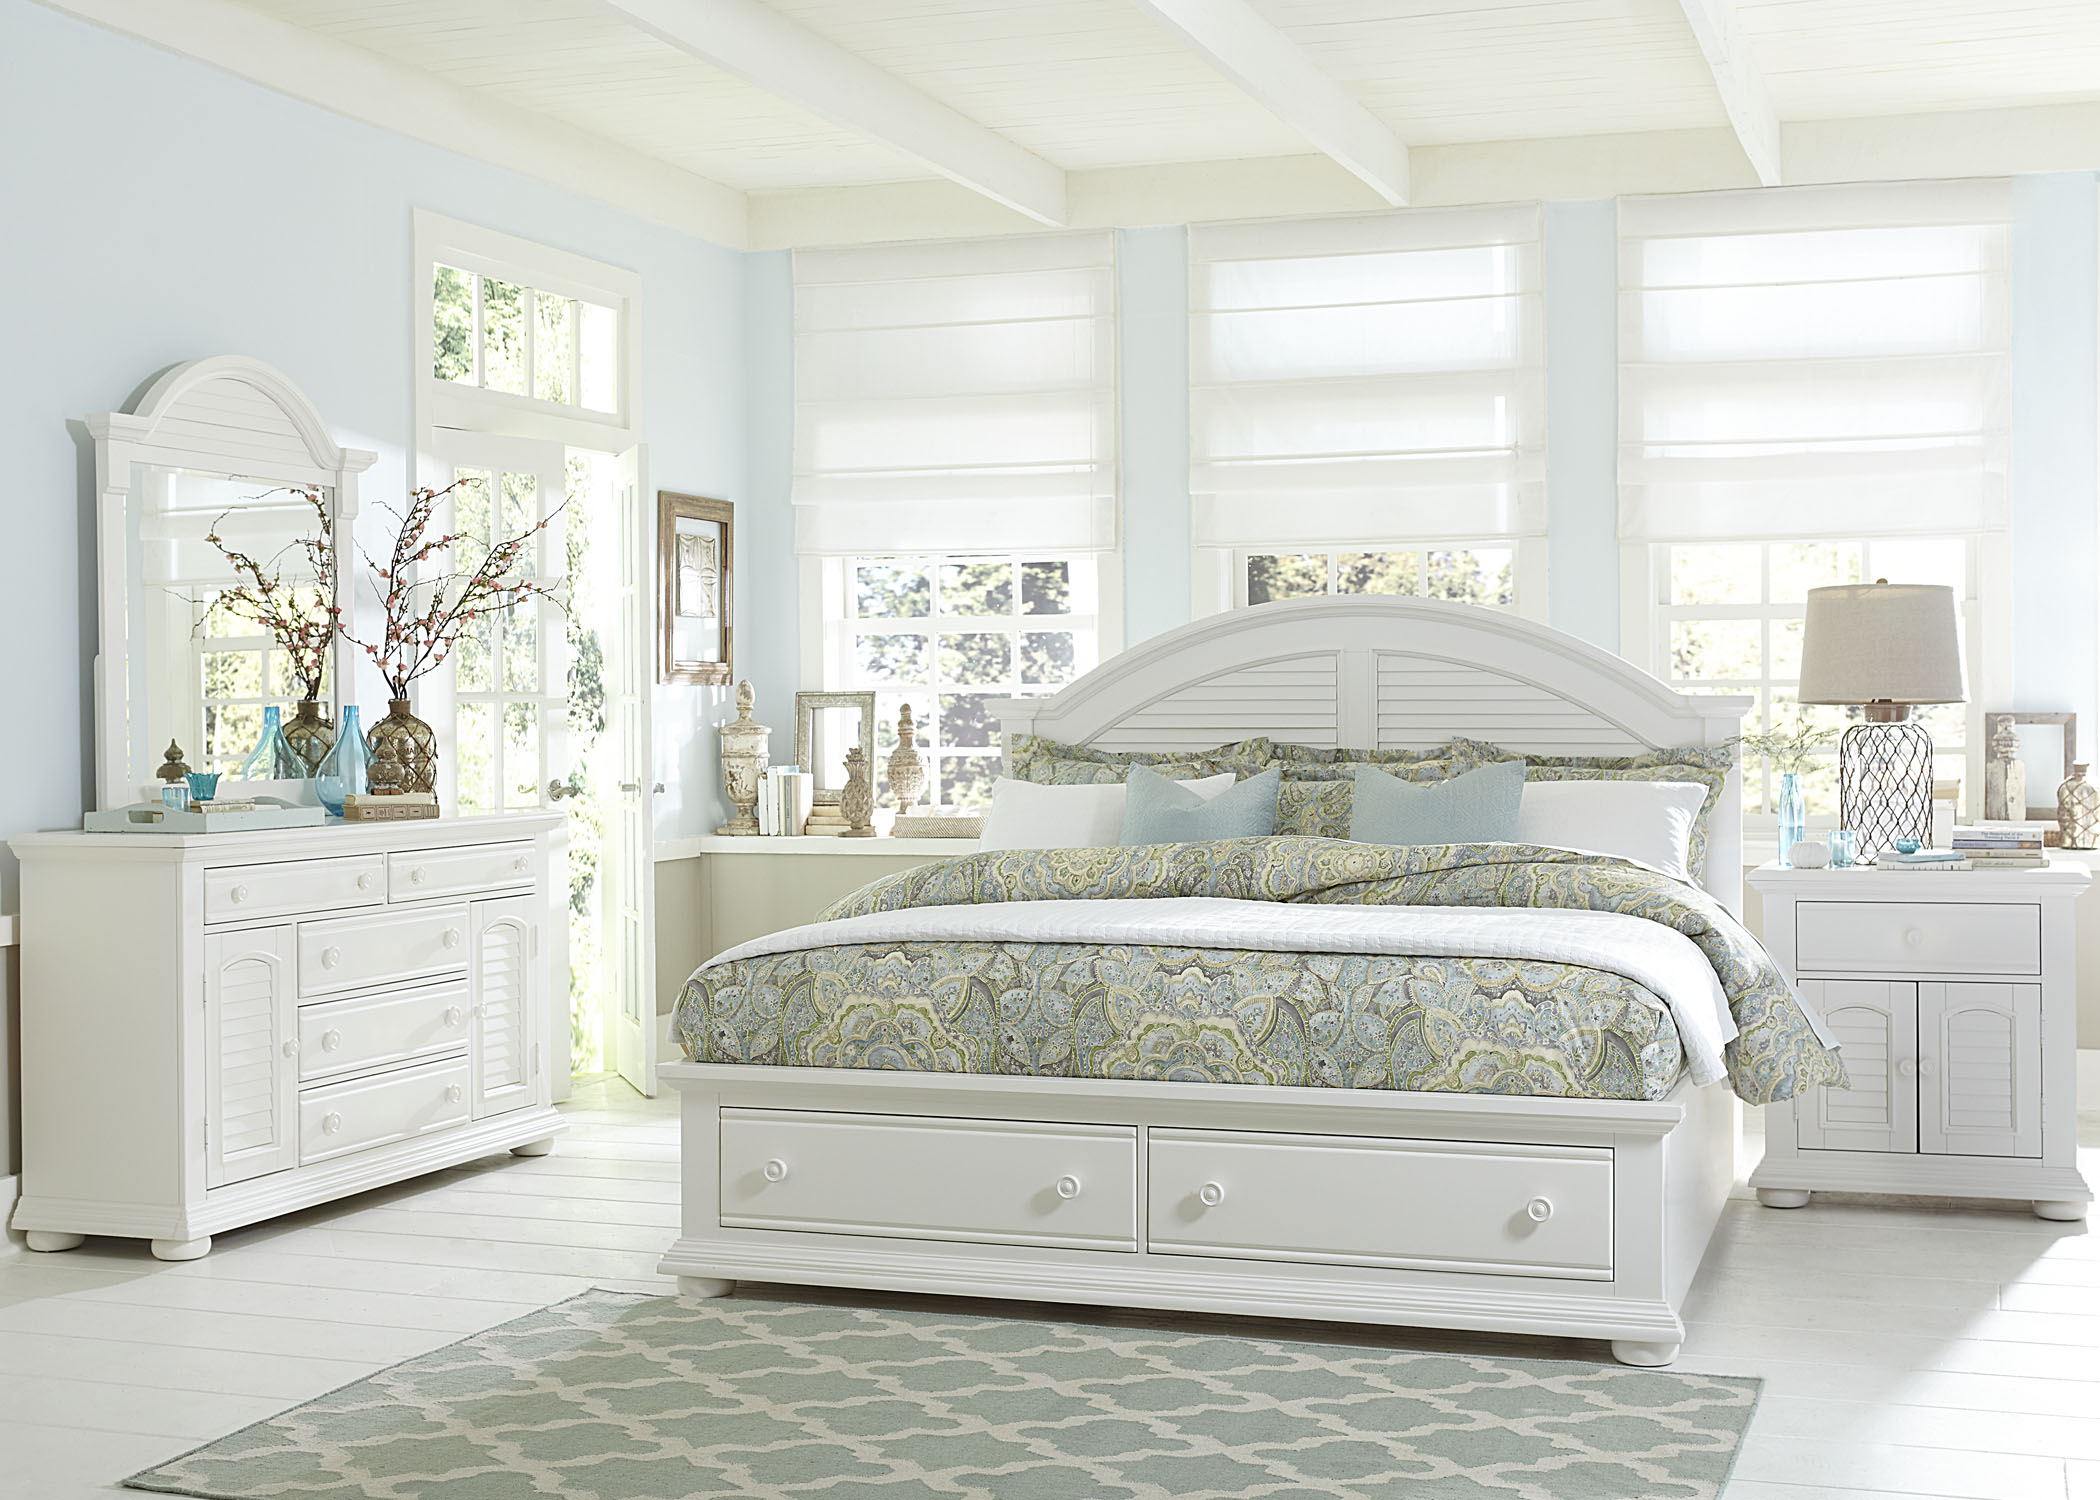 Liberty Furniture Summer House l Bedroom King Storage Bed, Dresser, Mirror and Night Stand Collection